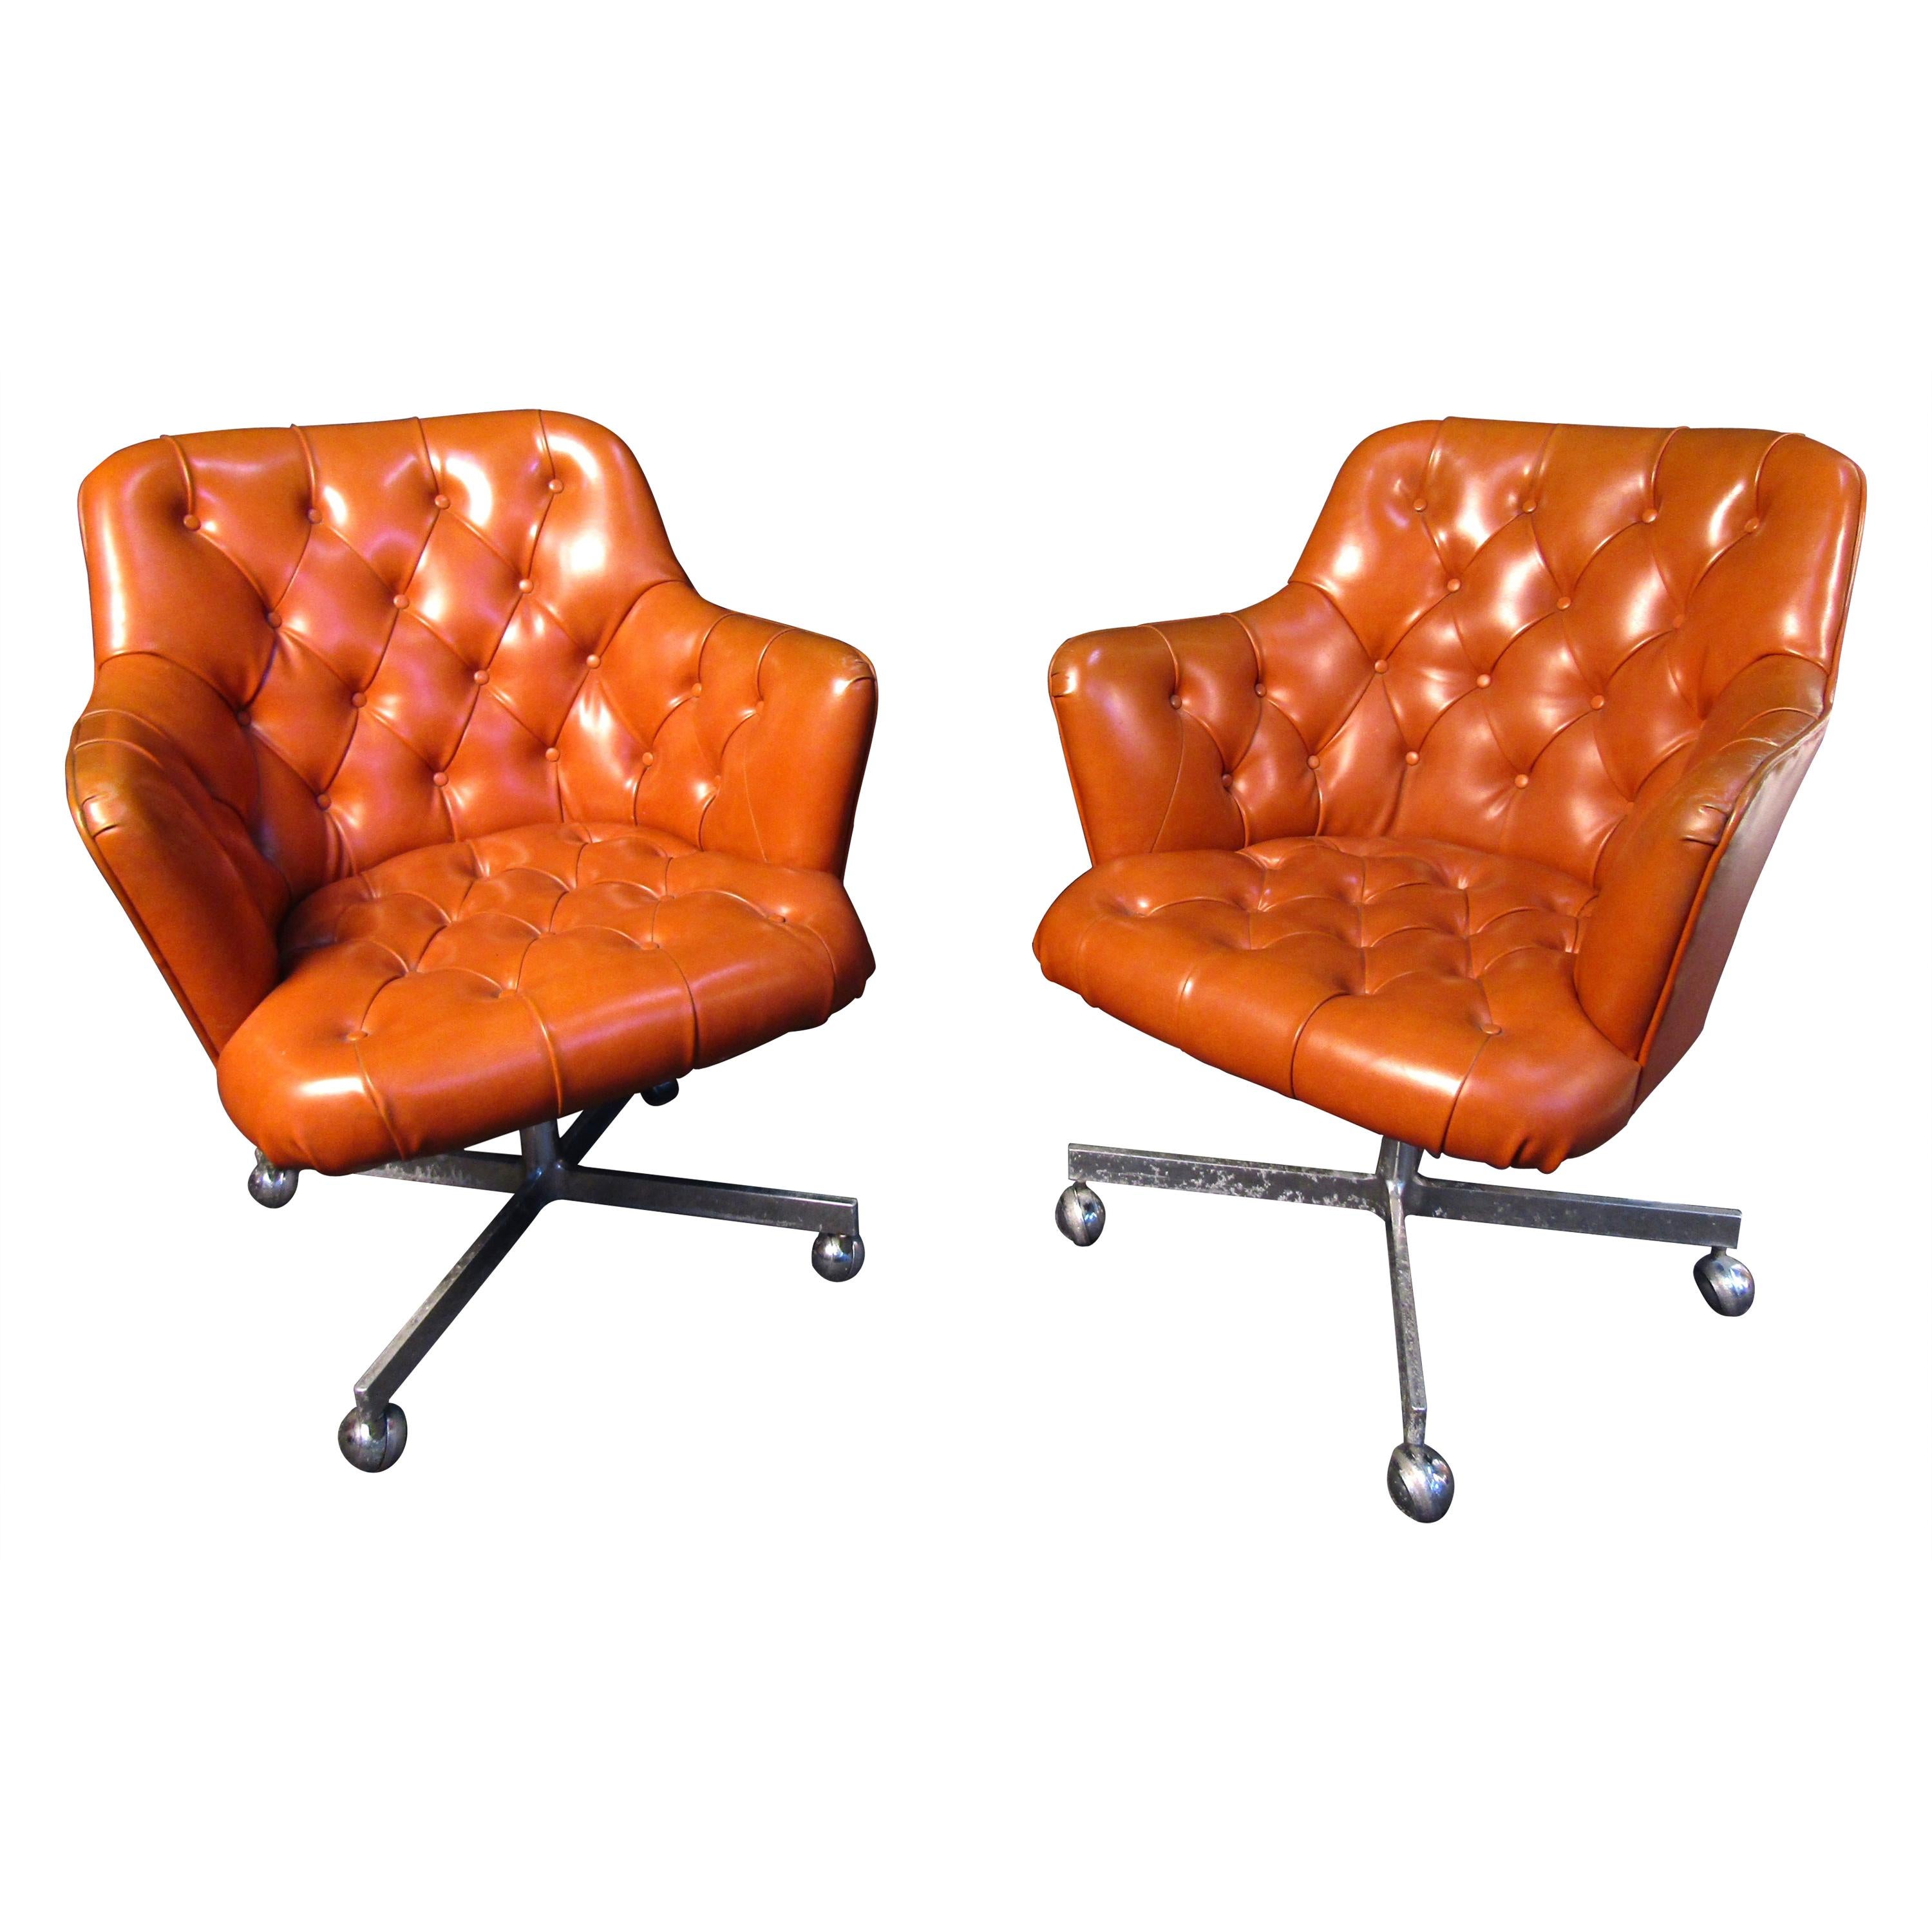 Pair of Mid-Century Modern Leather and Chrome Rolling Armchairs